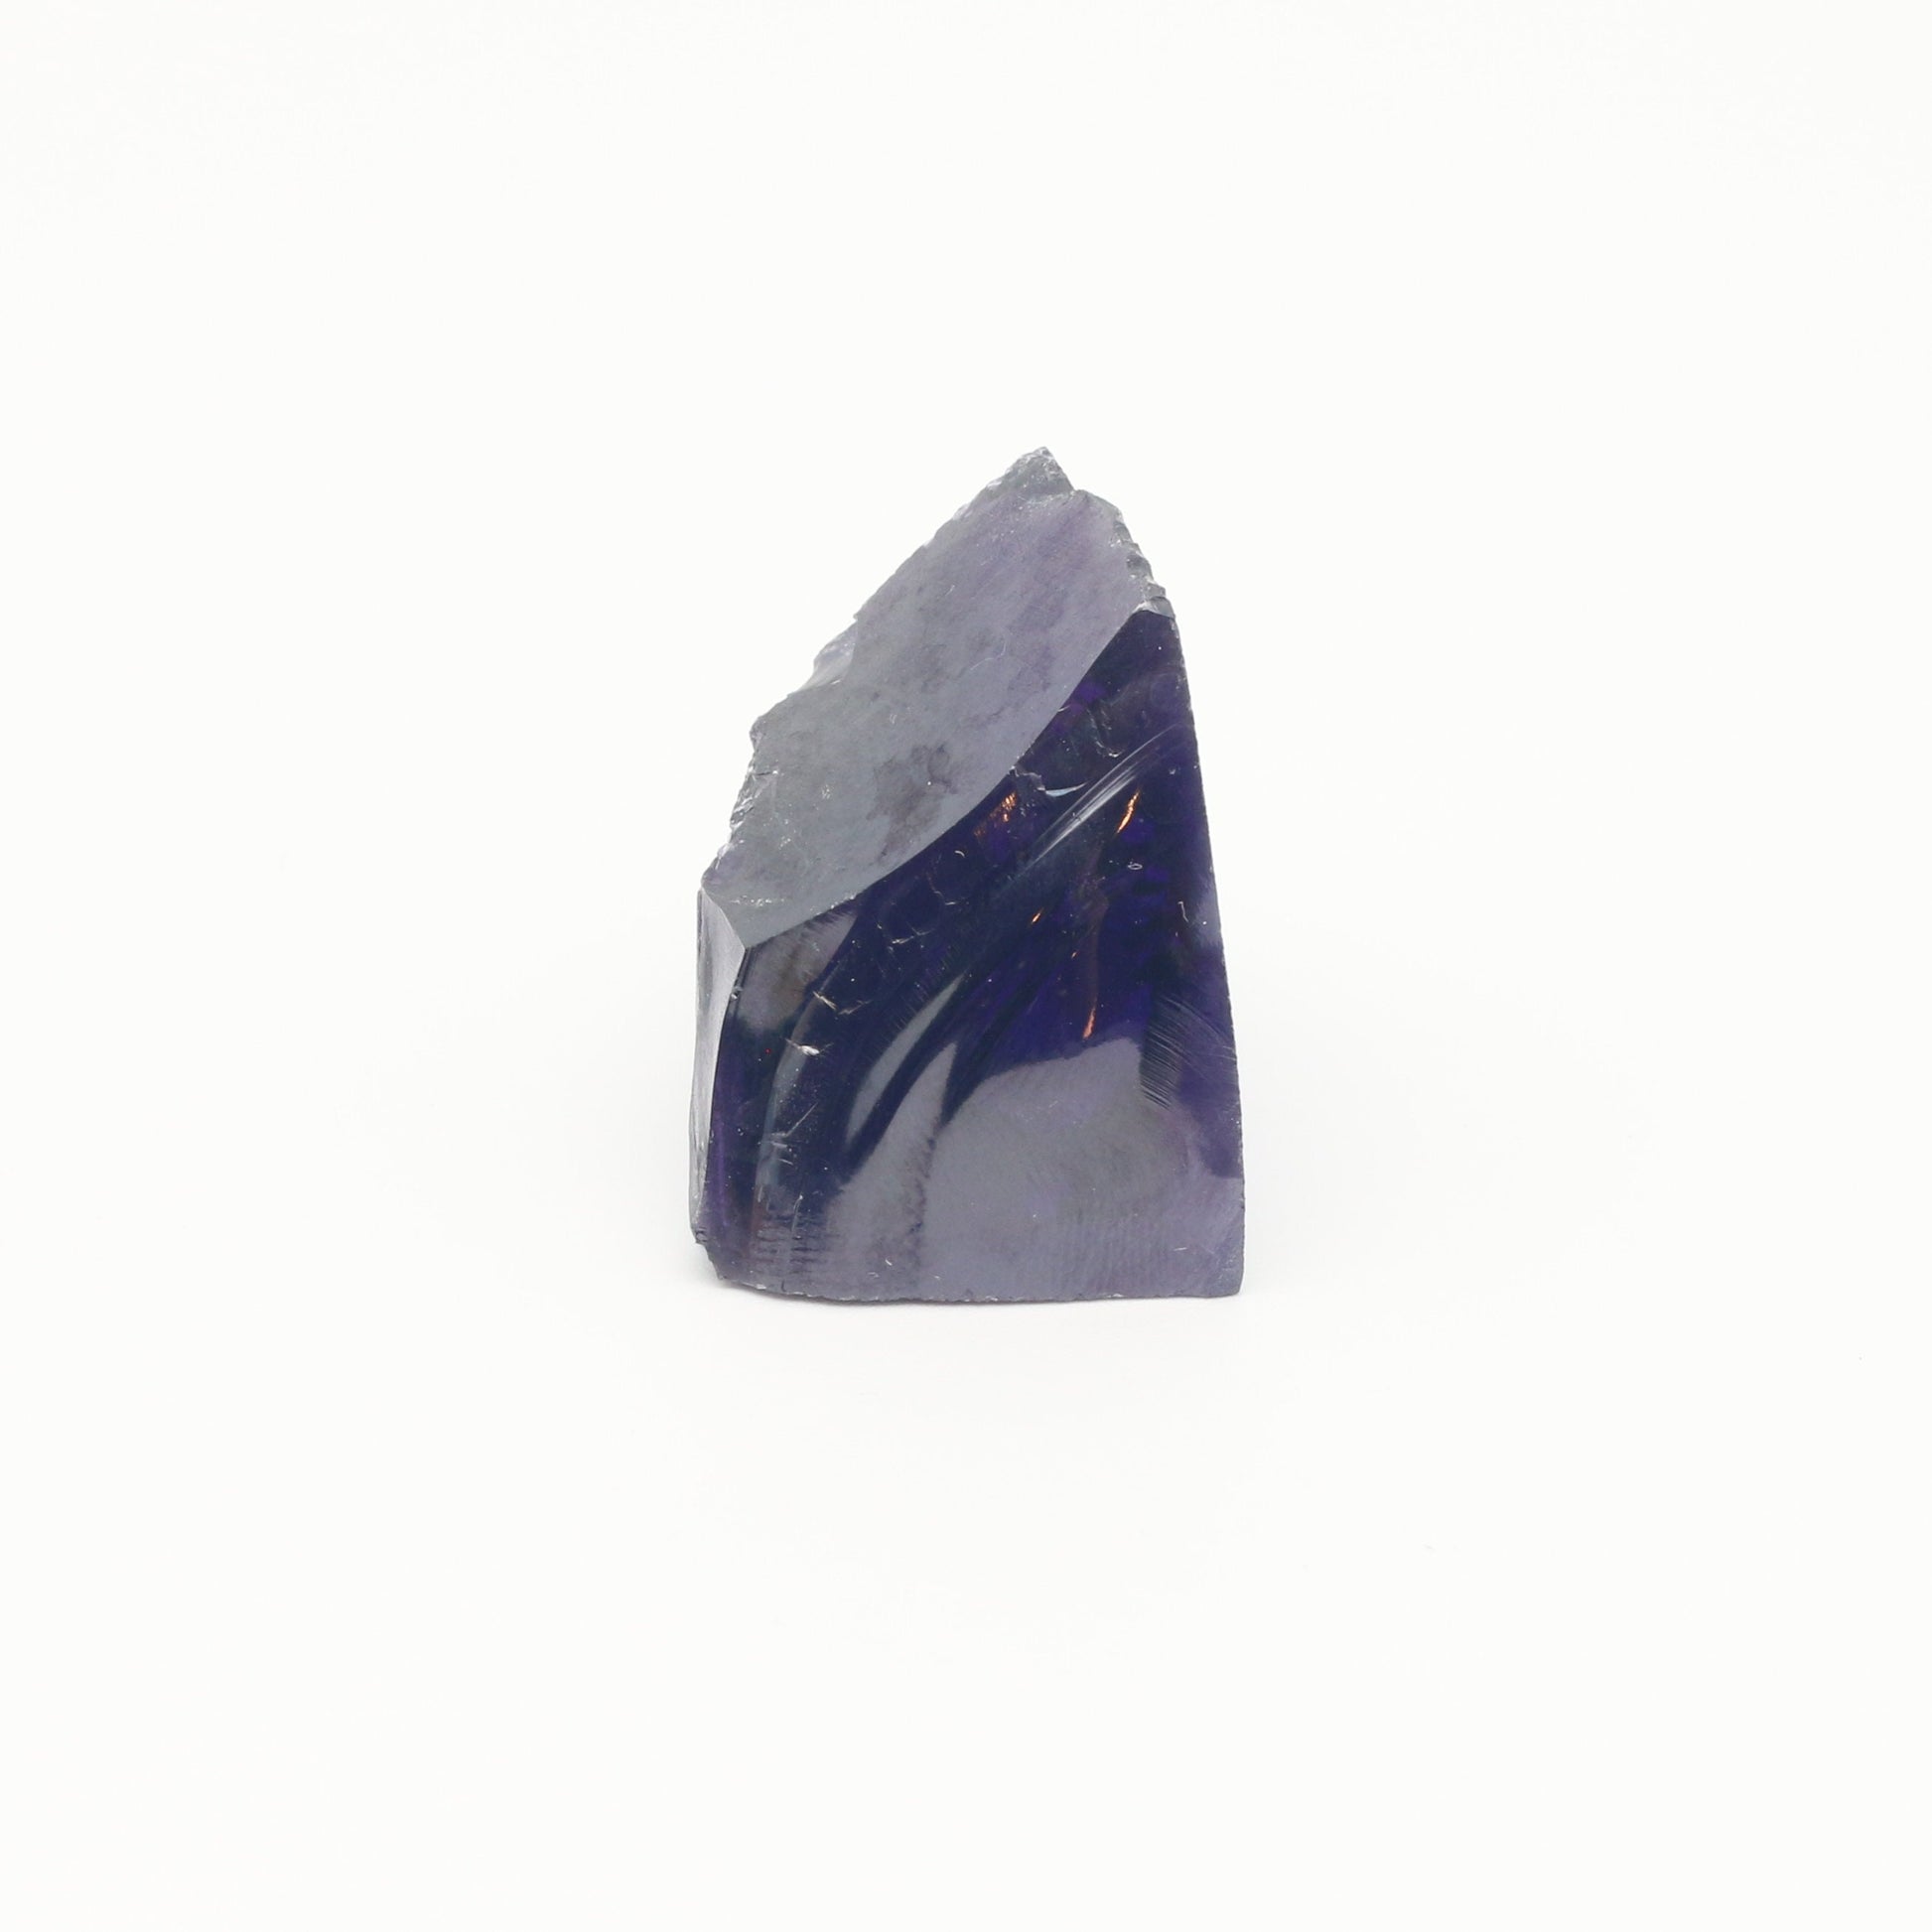 Violet Cubic Zirconia Faceting Rough for Gem Cutting - Various Sizes